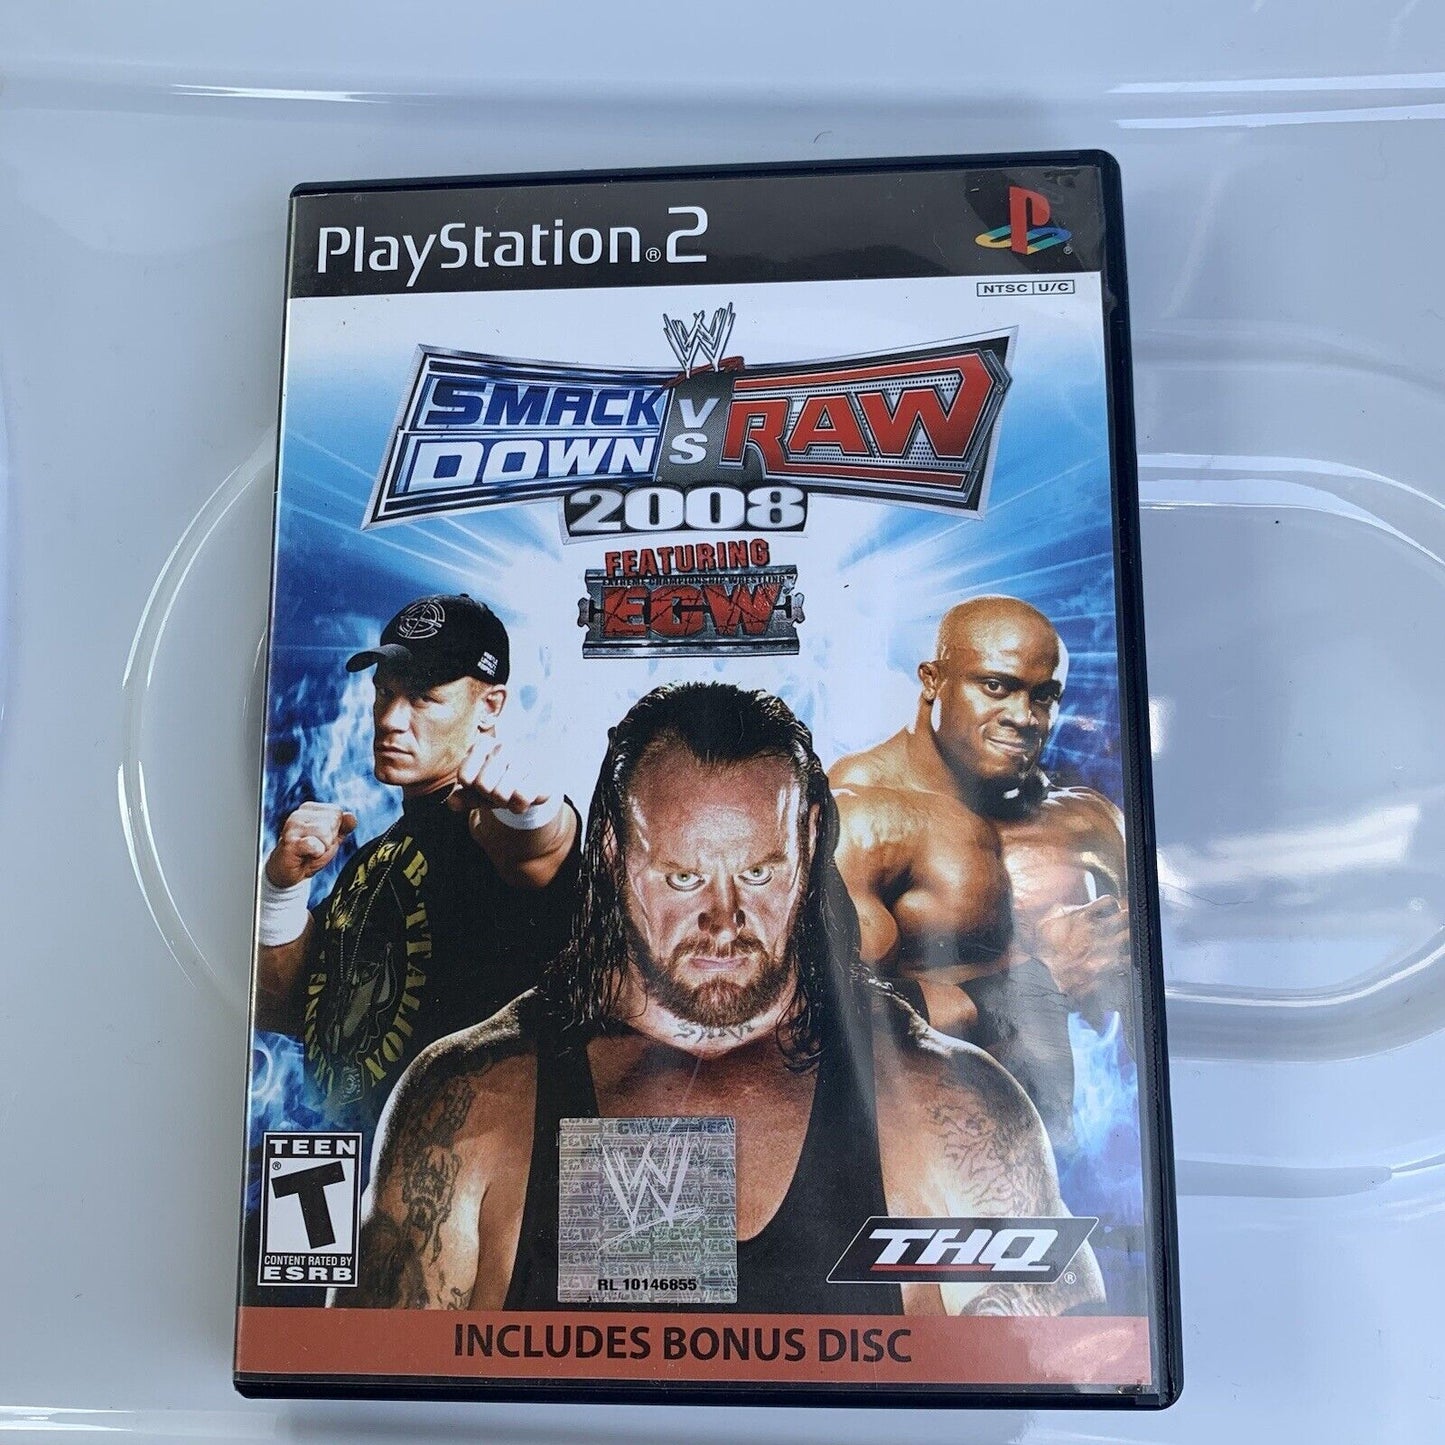 WWE SmackDown vs Raw 2008 PS2 Featuring ECW Complete Bonus Disc CIB Tested